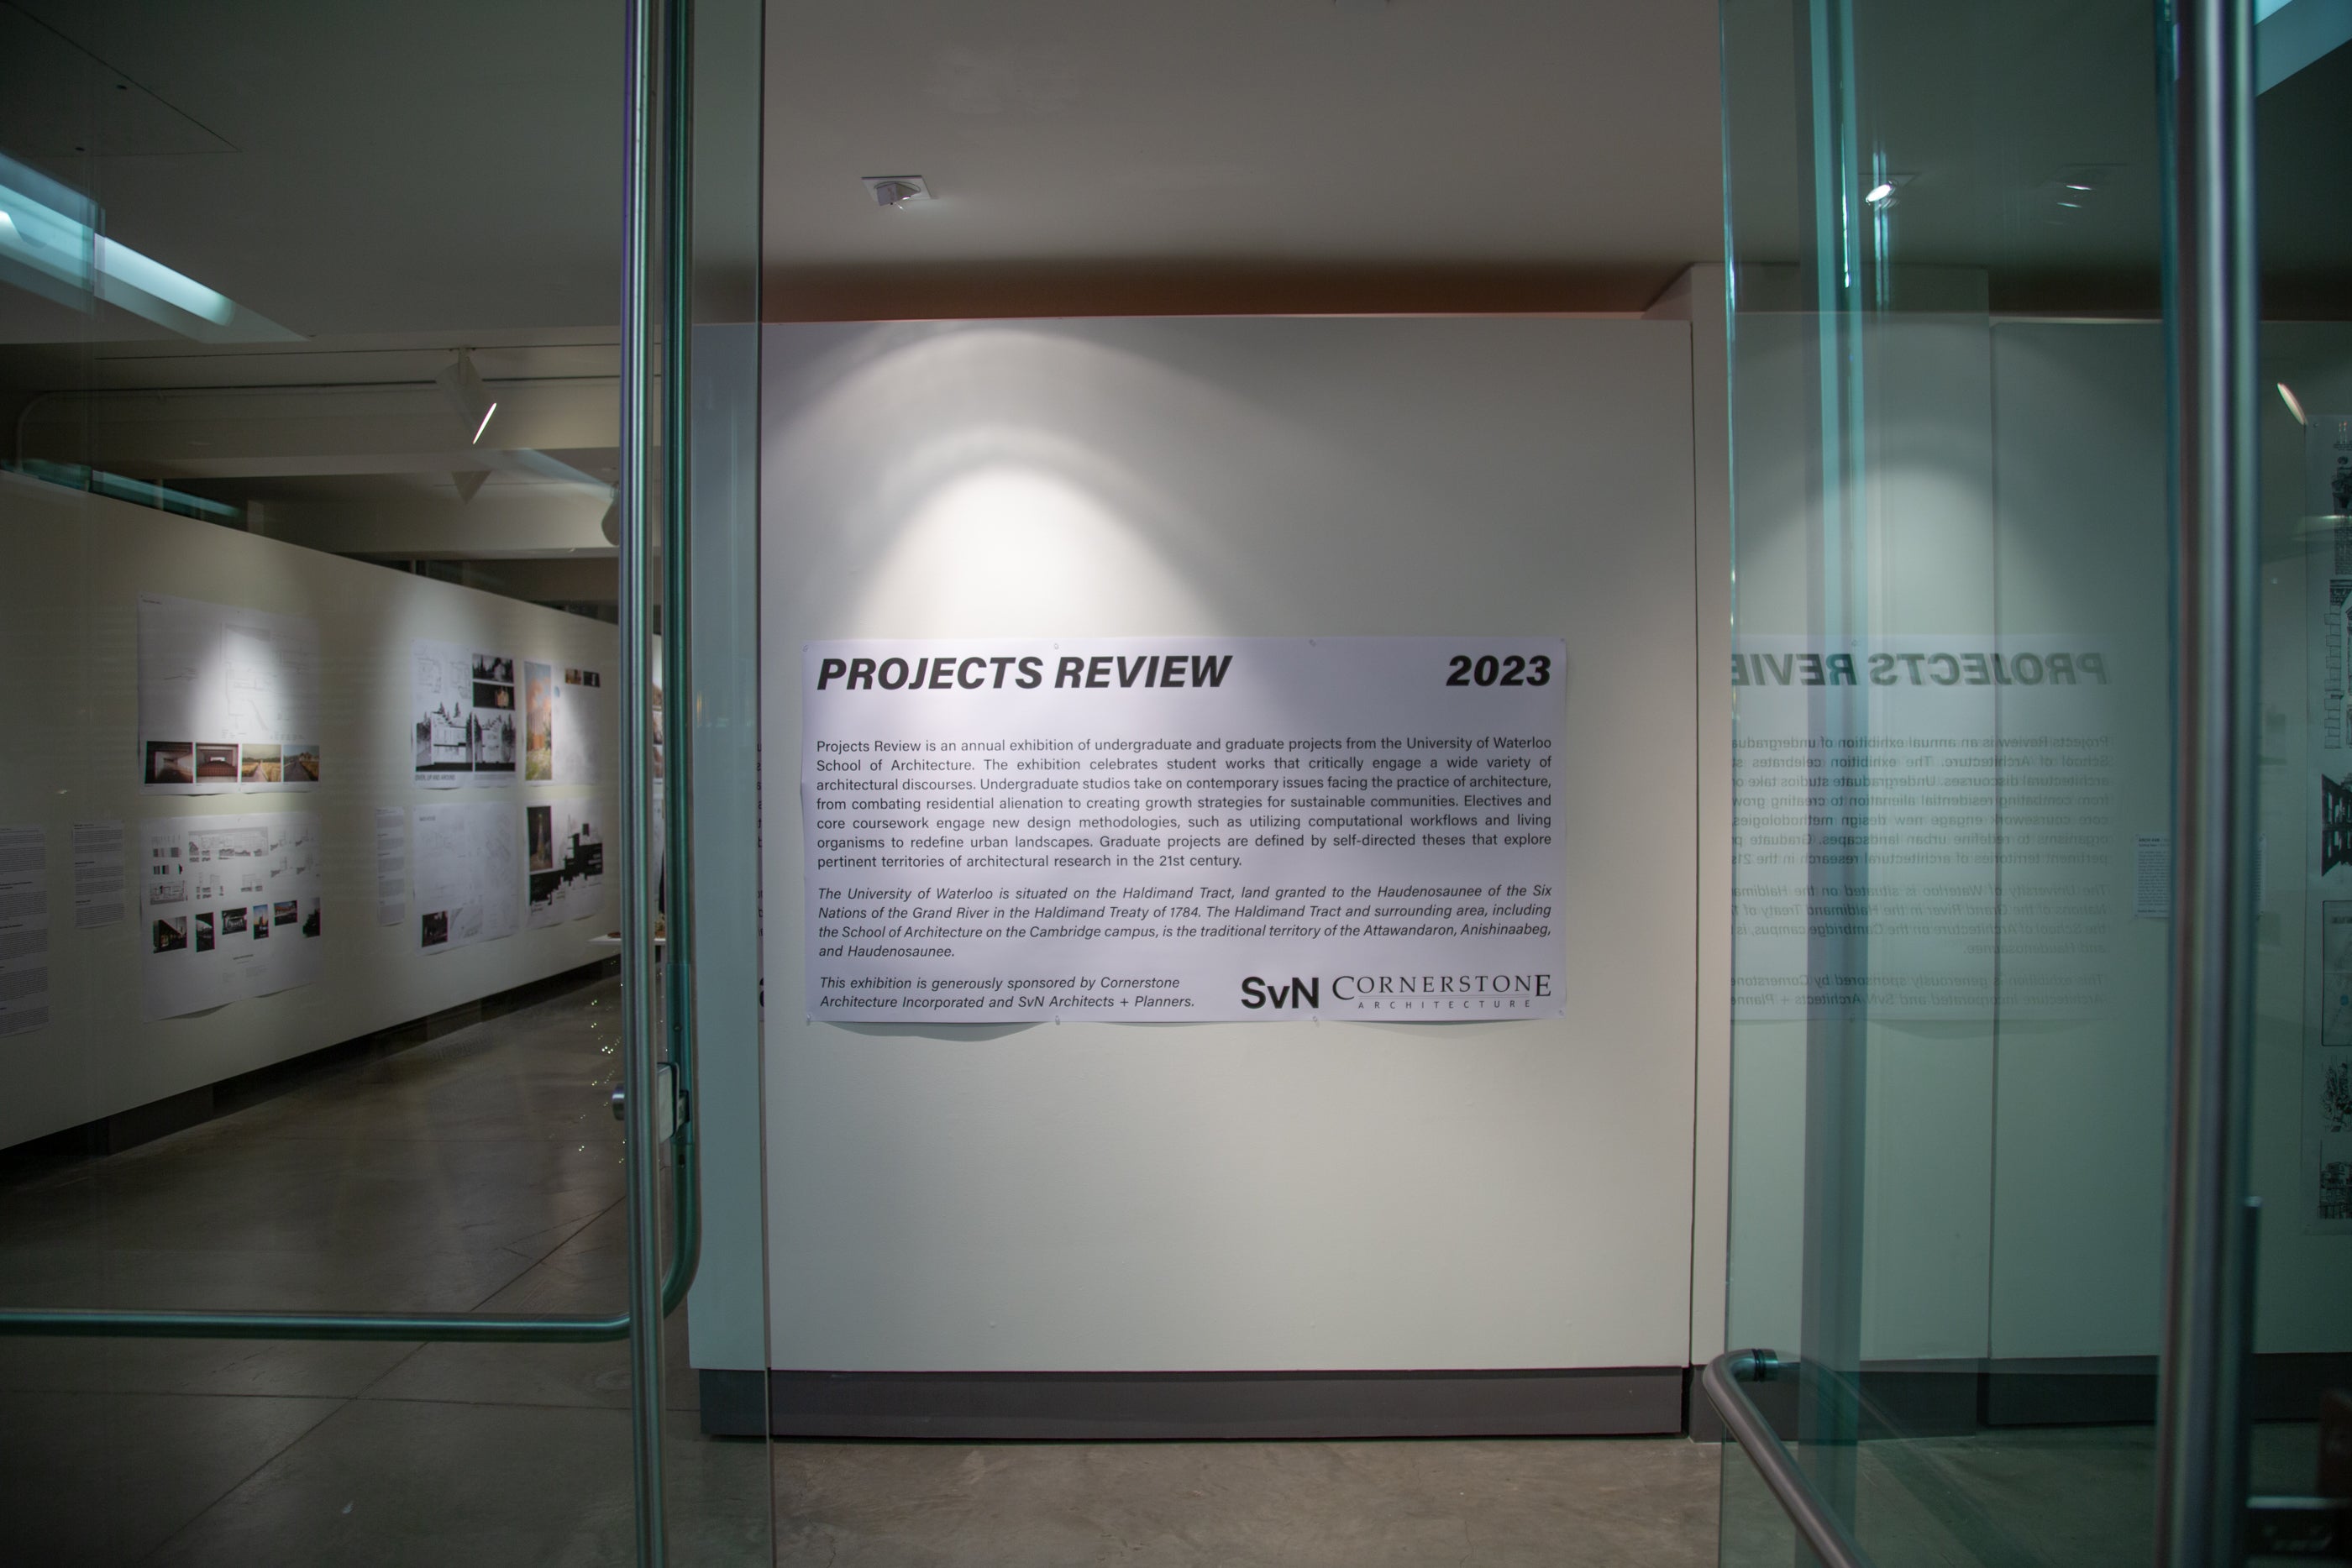 Installation view of the Projects Review 2023 exhibition